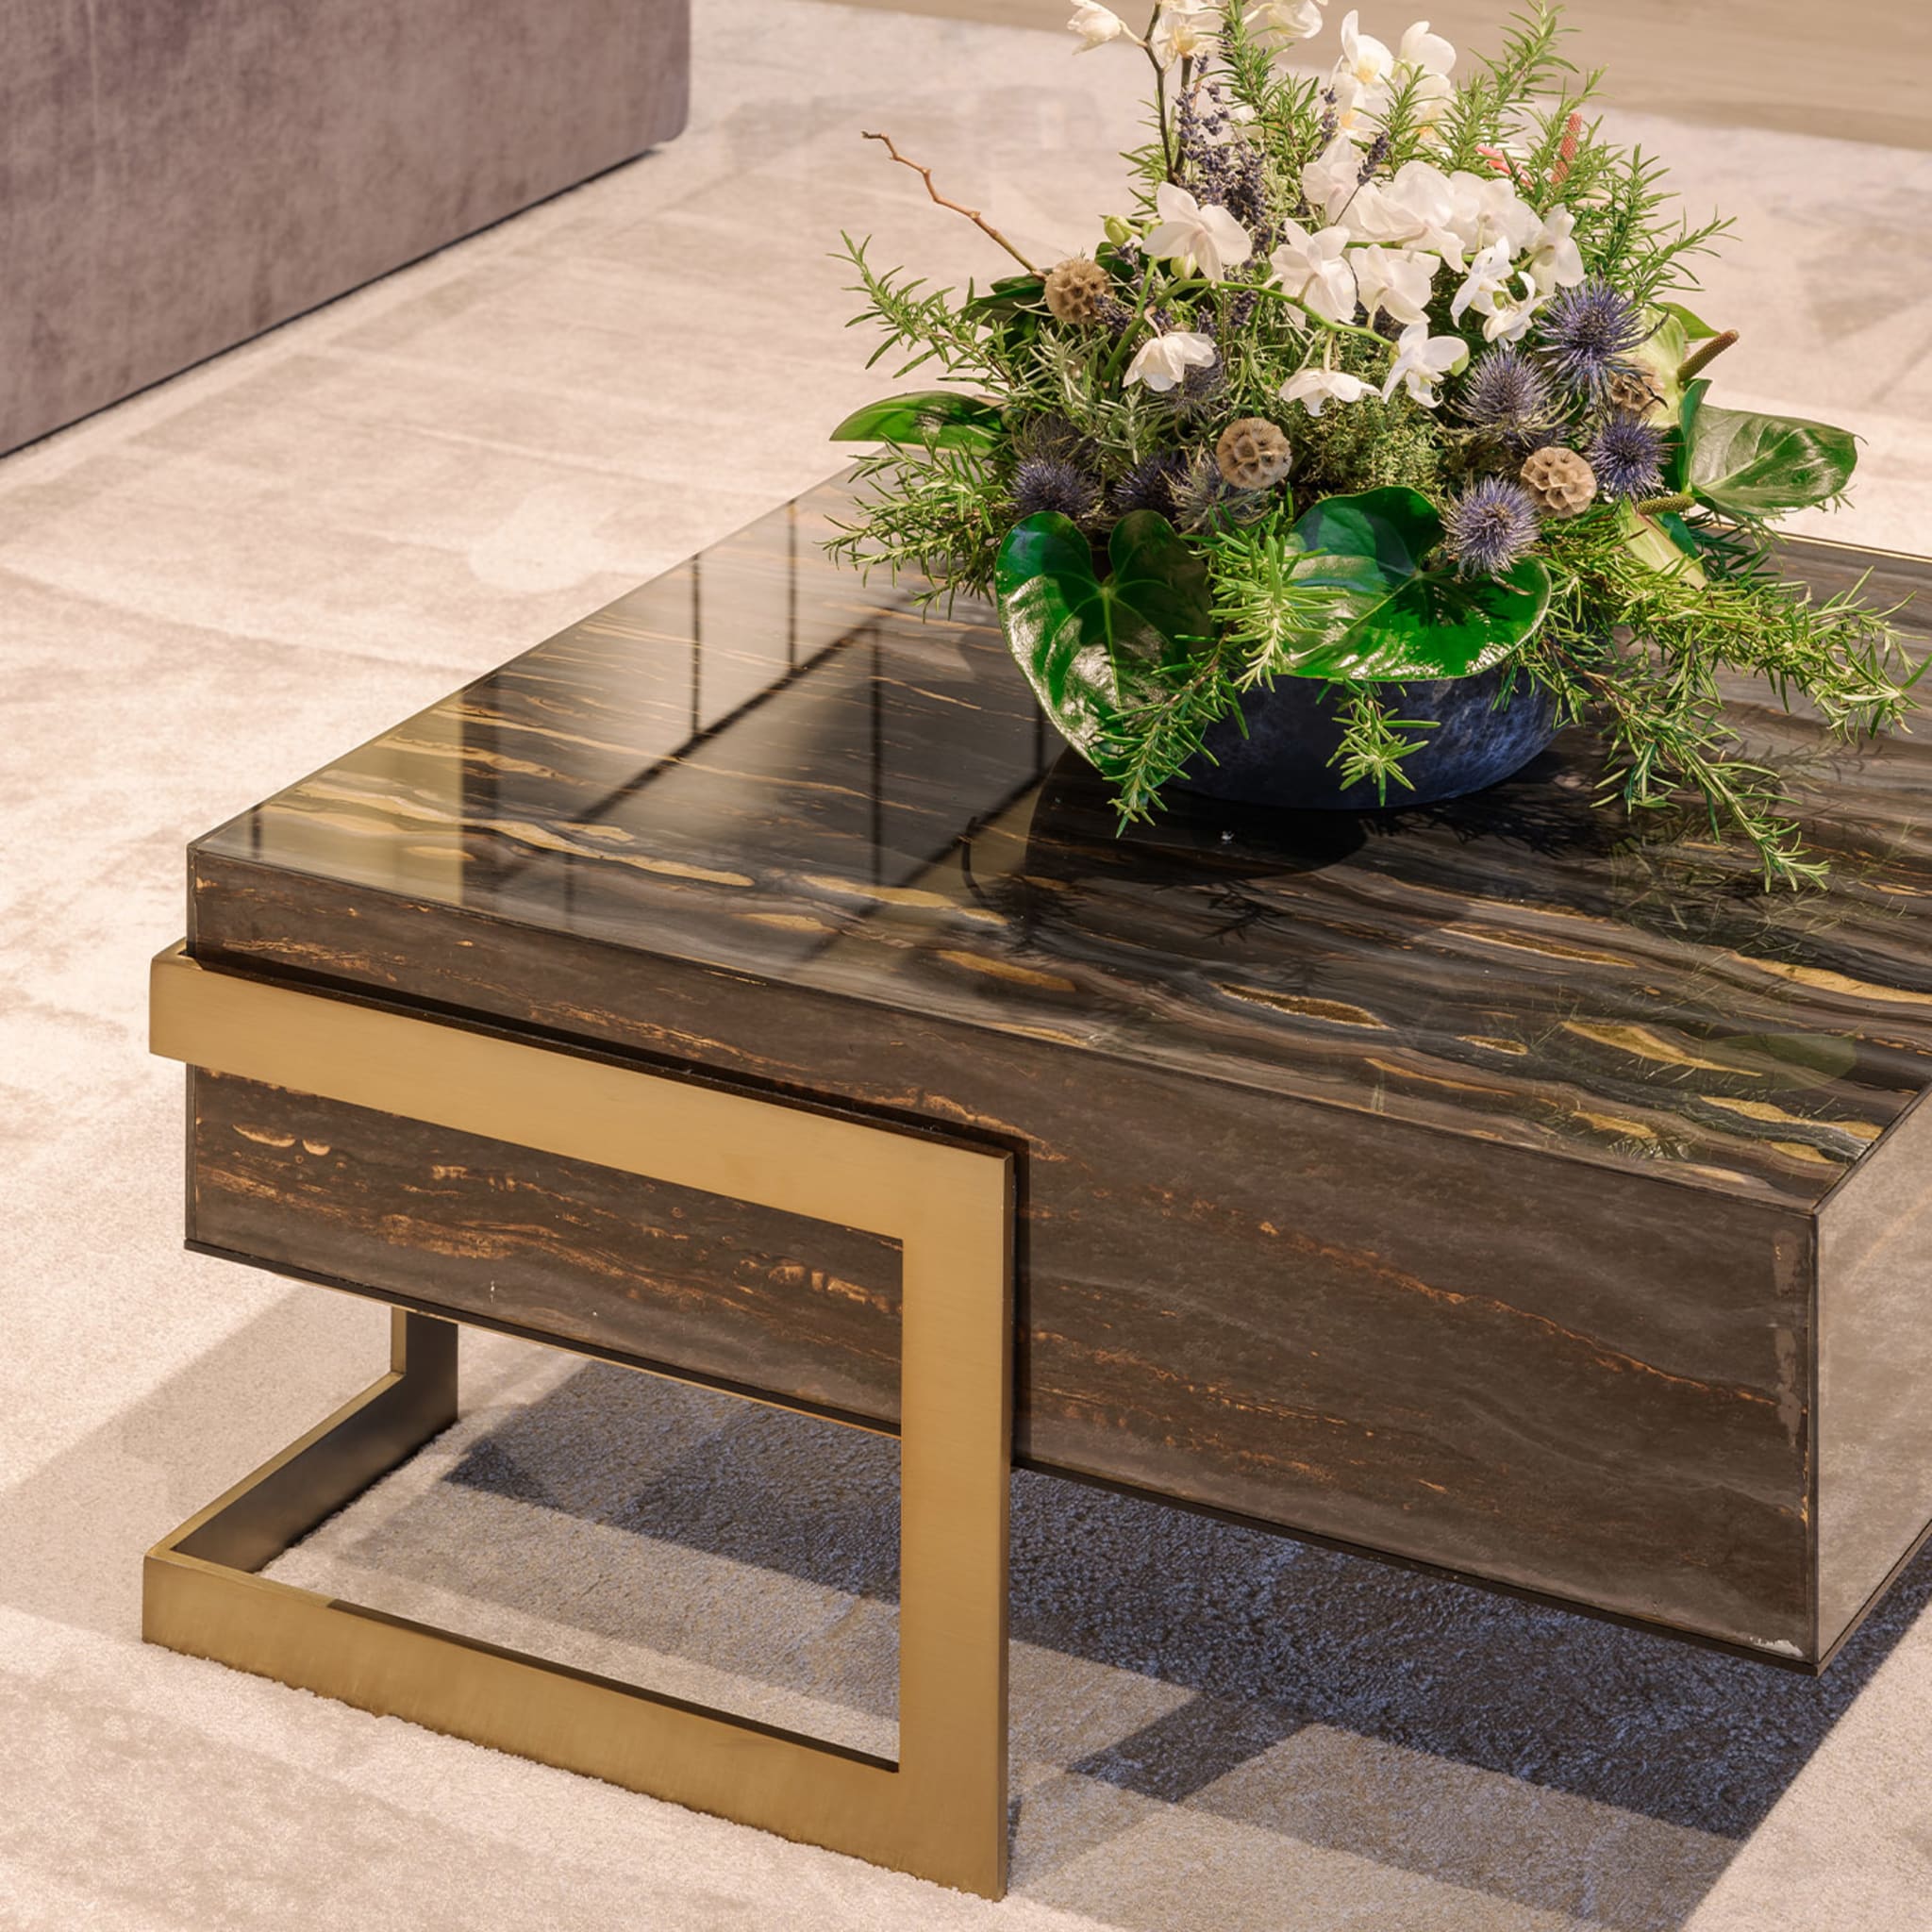 Holbrook Coffee Table by Giannella Ventura - Alternative view 2